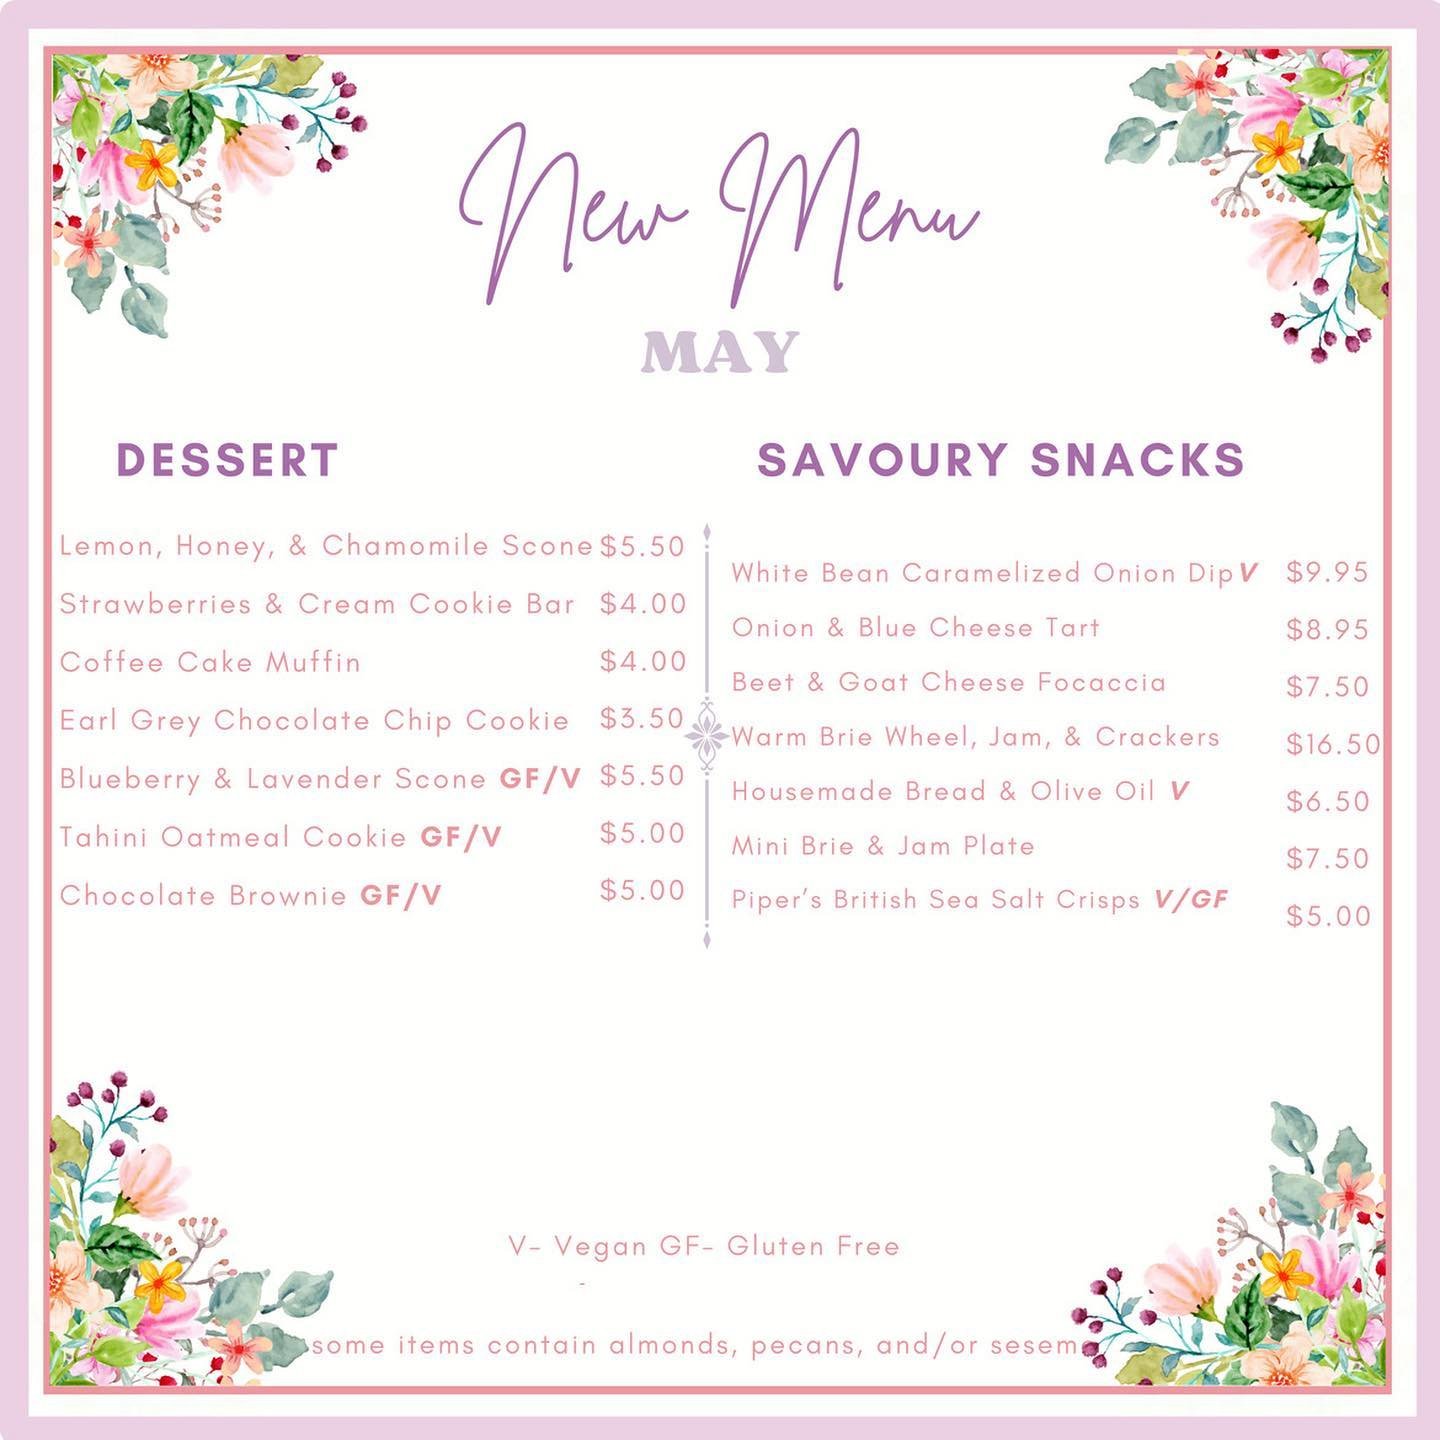 Hello May!! 🌸☀️🌸 We are so excited to launch our May menu this week full of springtime goodies! As a reminder we will be closed to the public on Sunday May 5th and Sunday May 12th for our fully booked Mother&rsquo;s Day tea services! #newmenu #spri